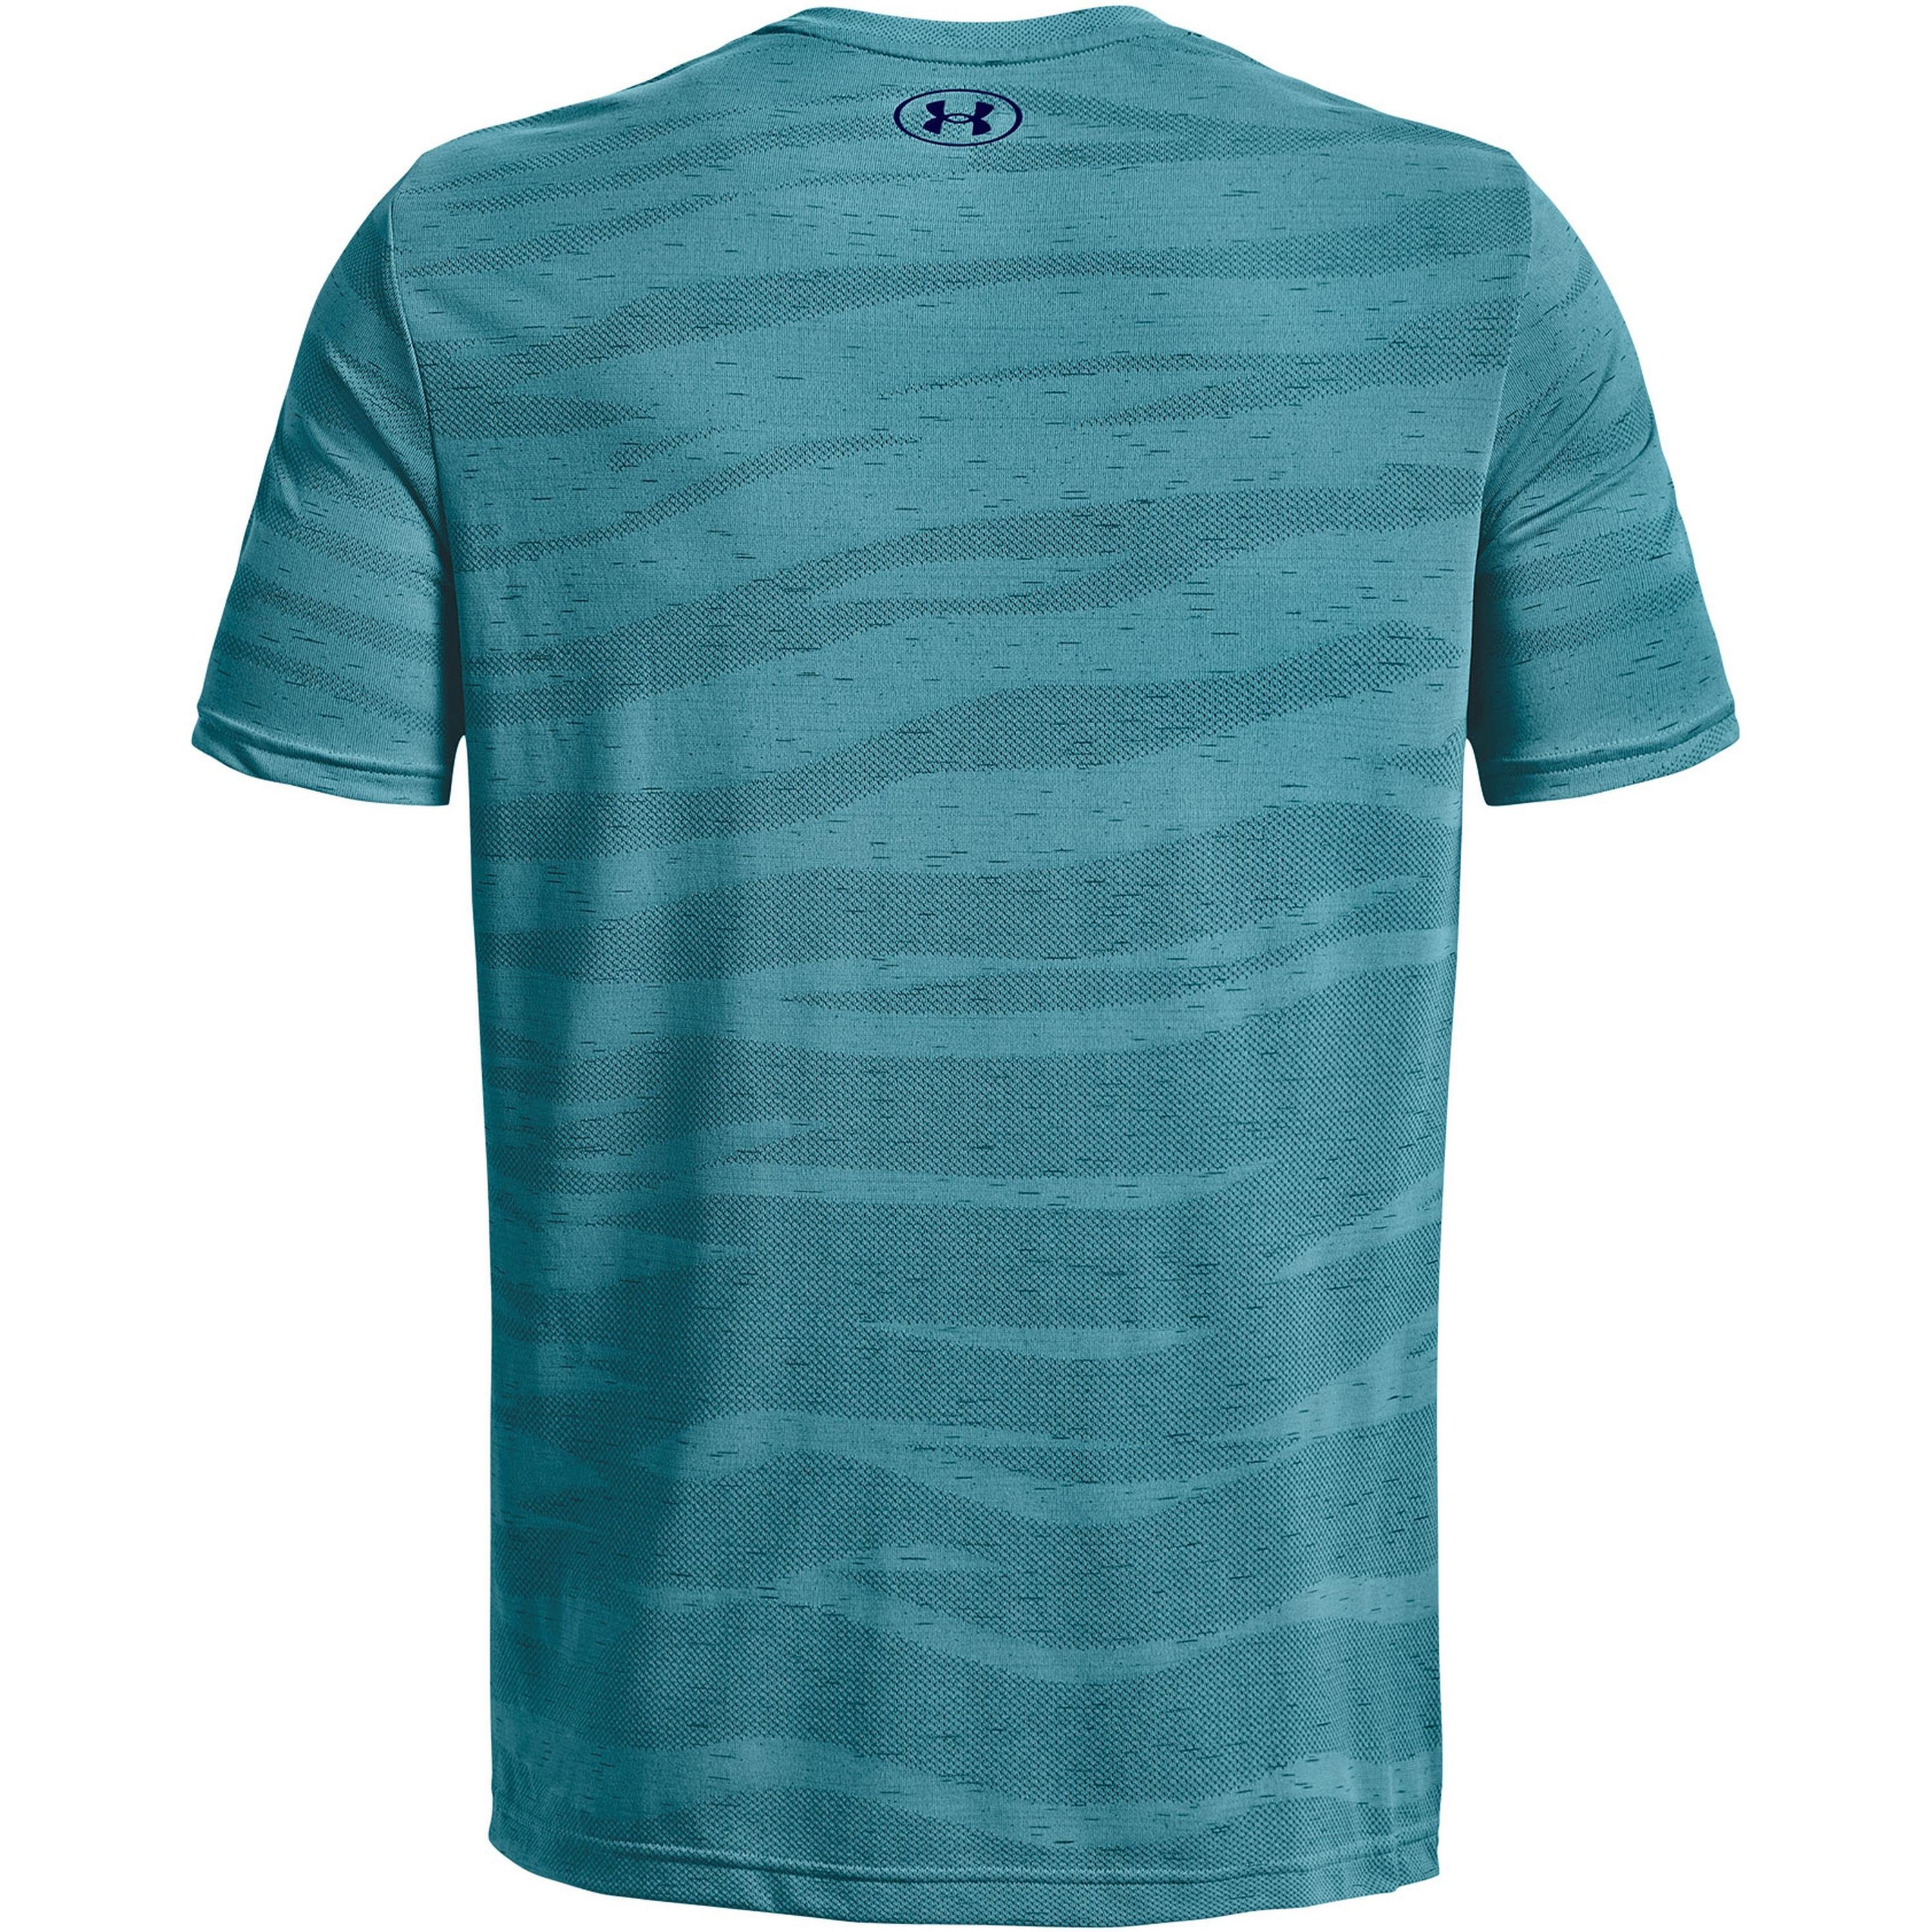 Funktionsshirt Seamless Under Armour® glacierblue-sonarblue